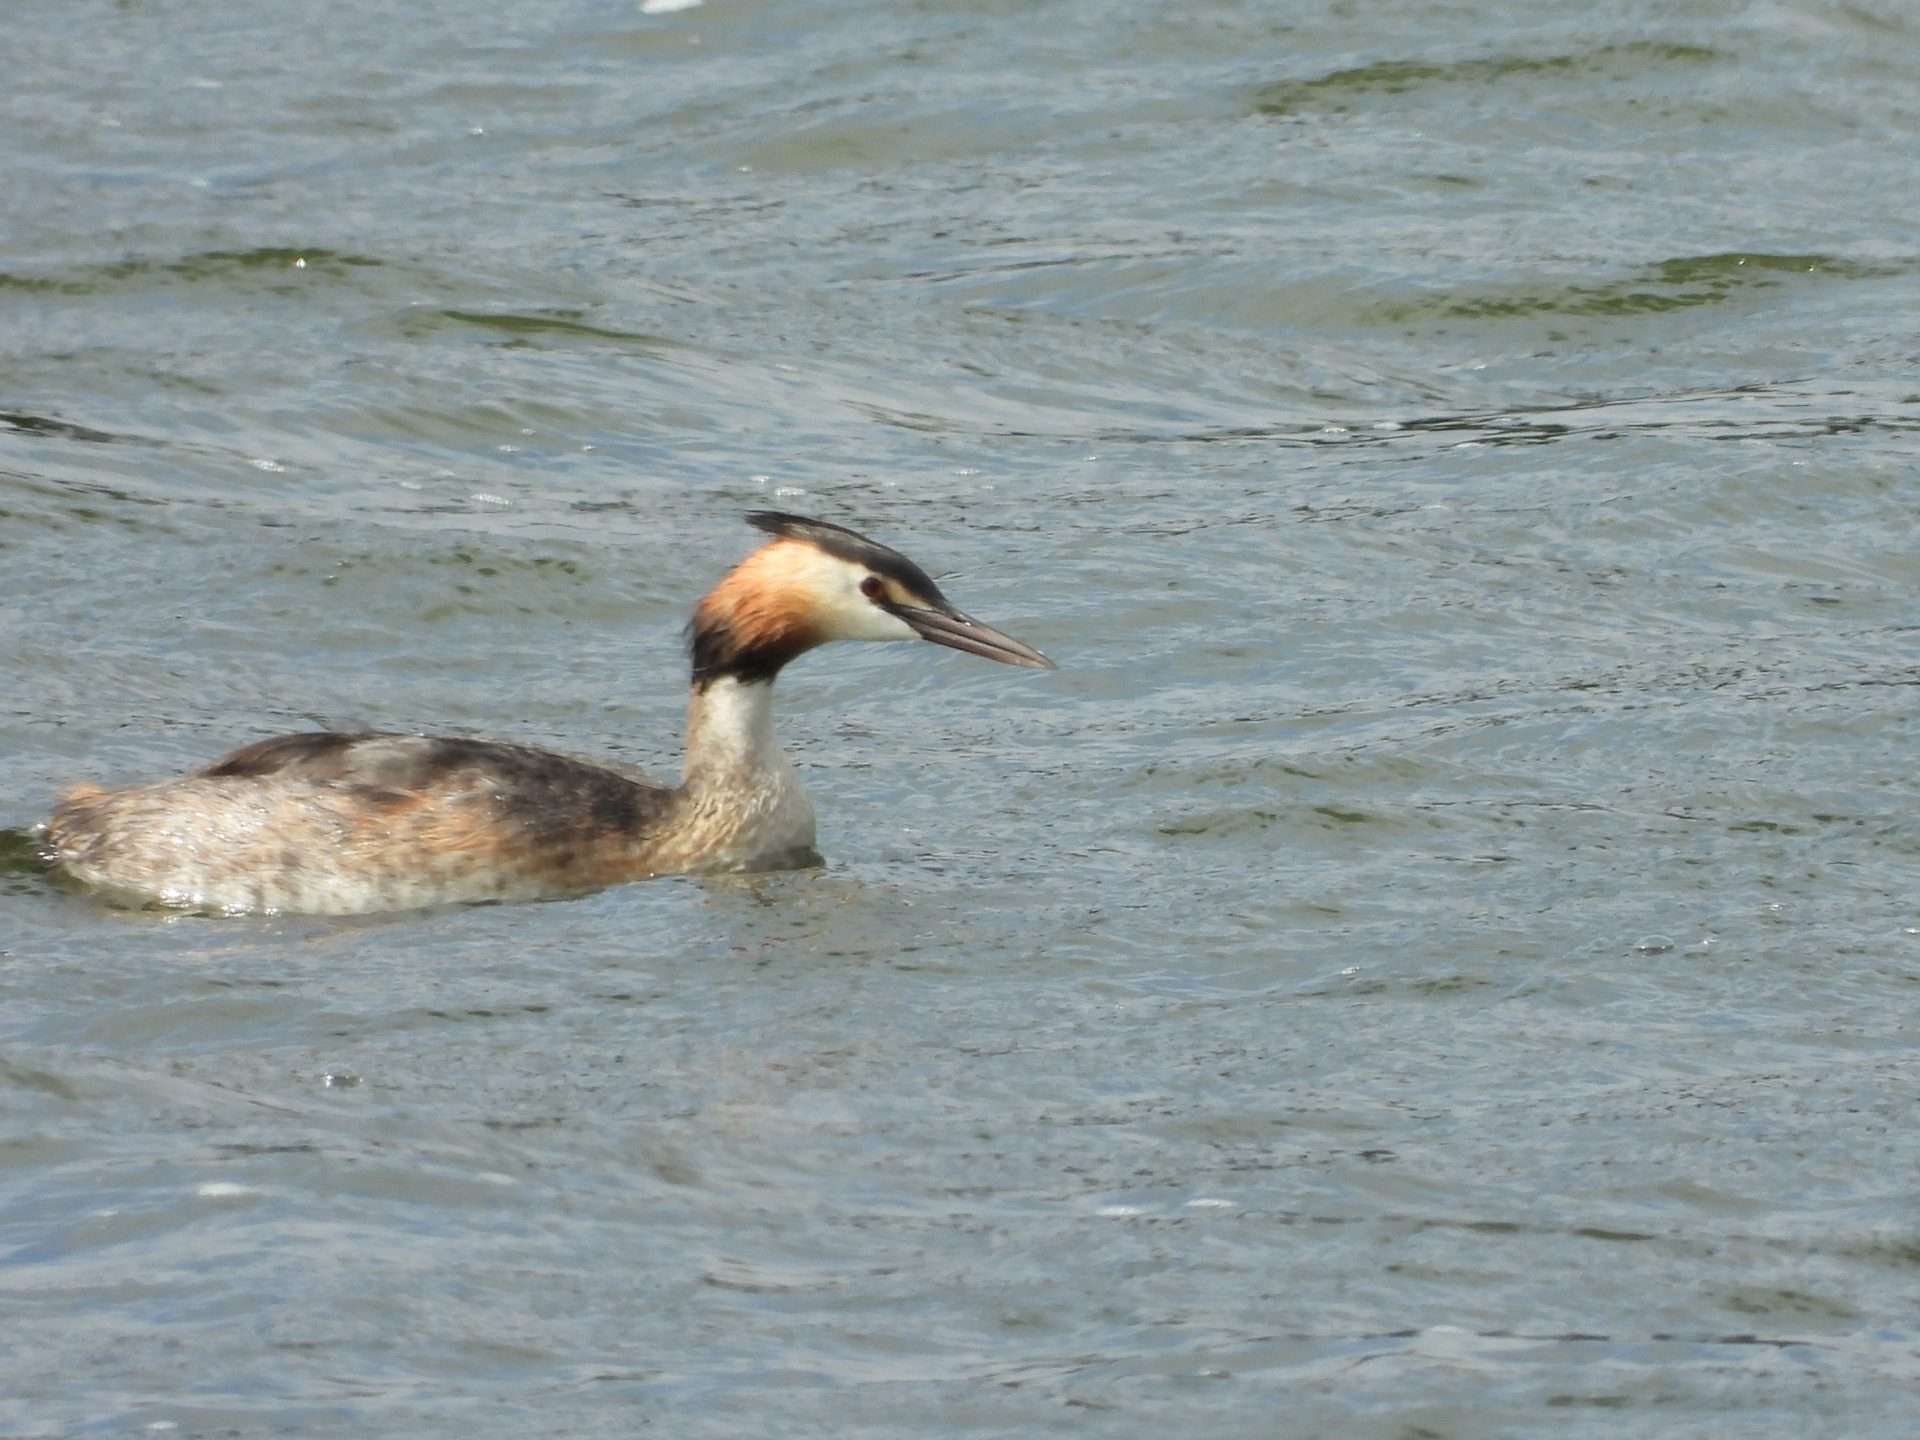 Great Crested Grebe by Kenneth Bradley at Slapton